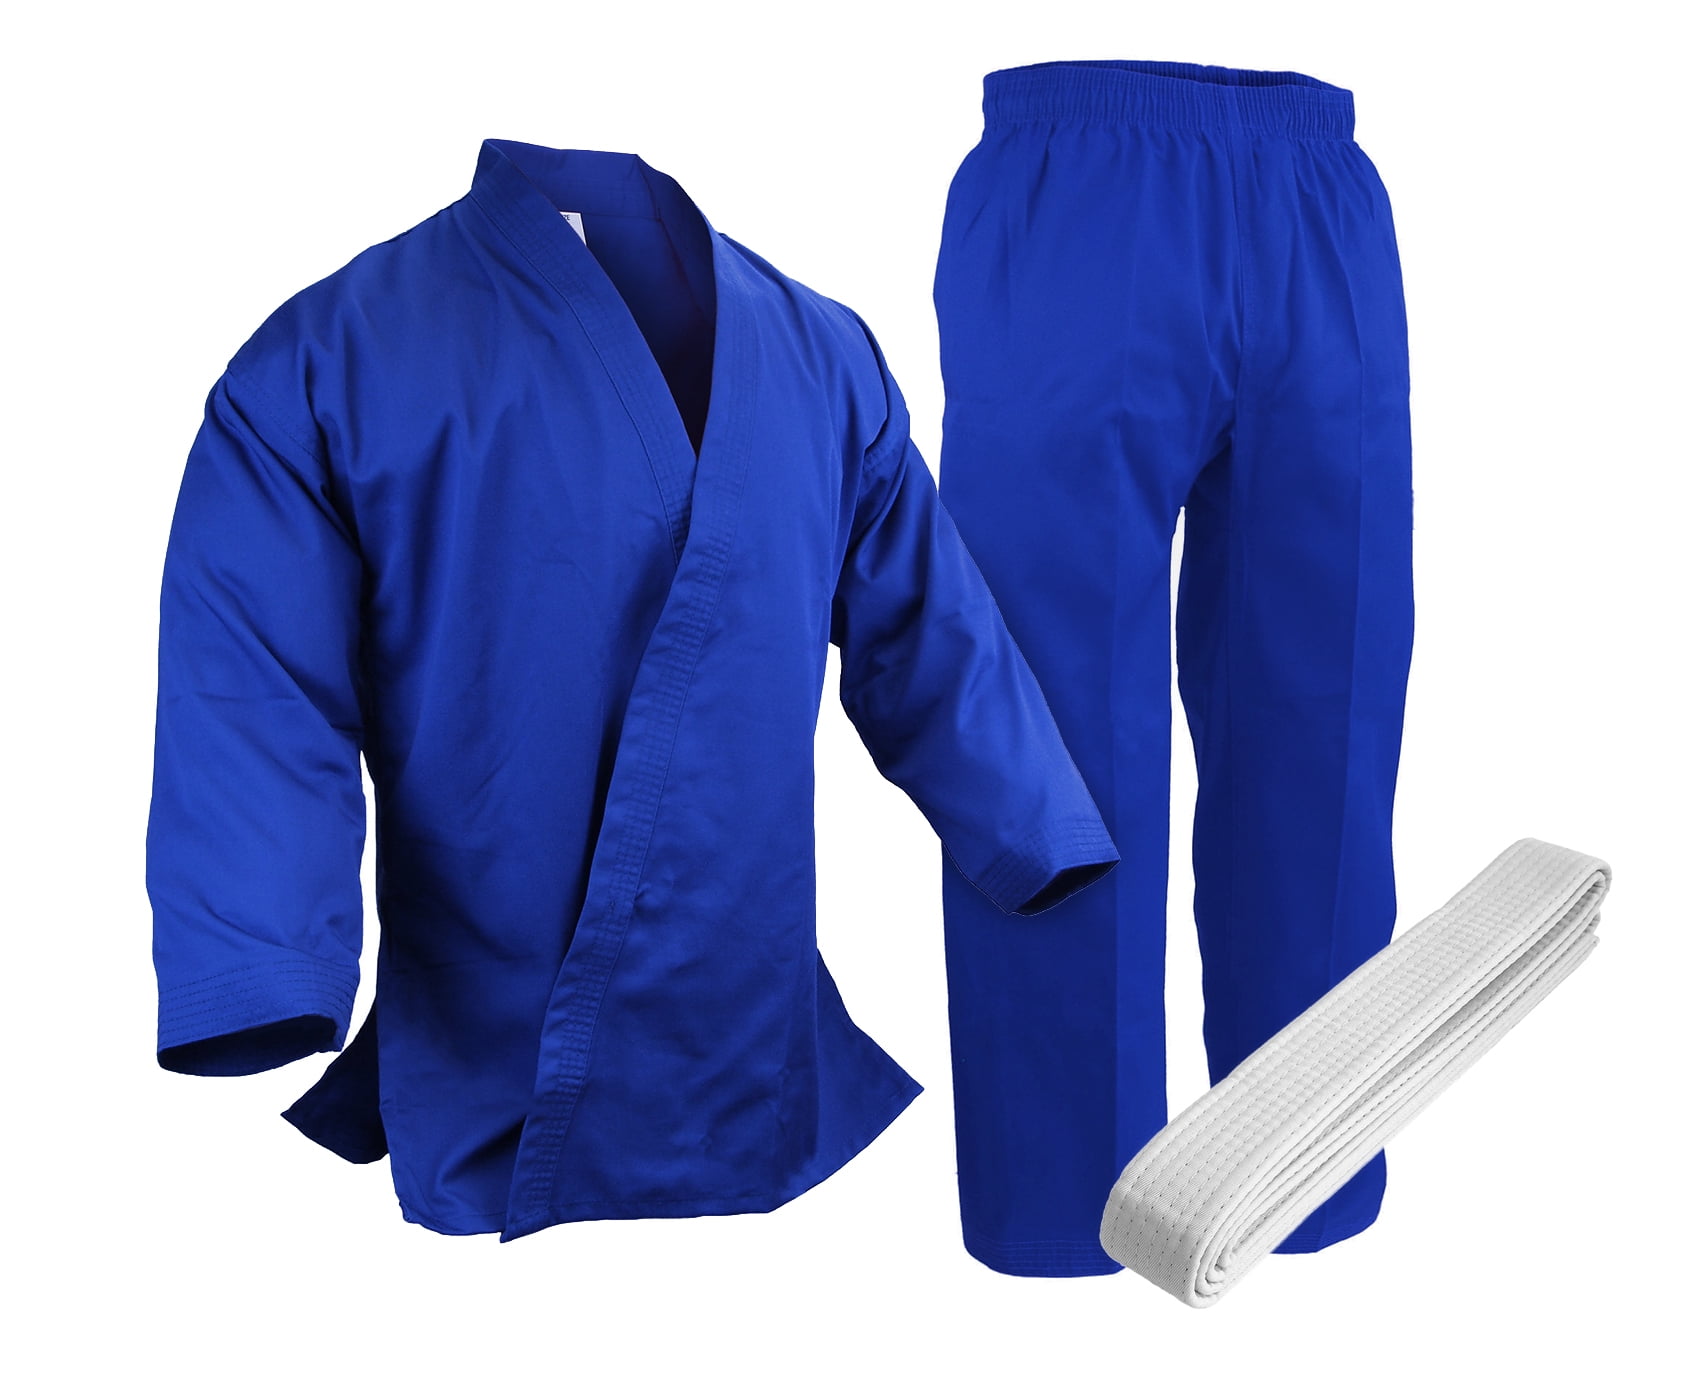 Prowin Corp - Martial Arts Supplies – Prowin Corp.